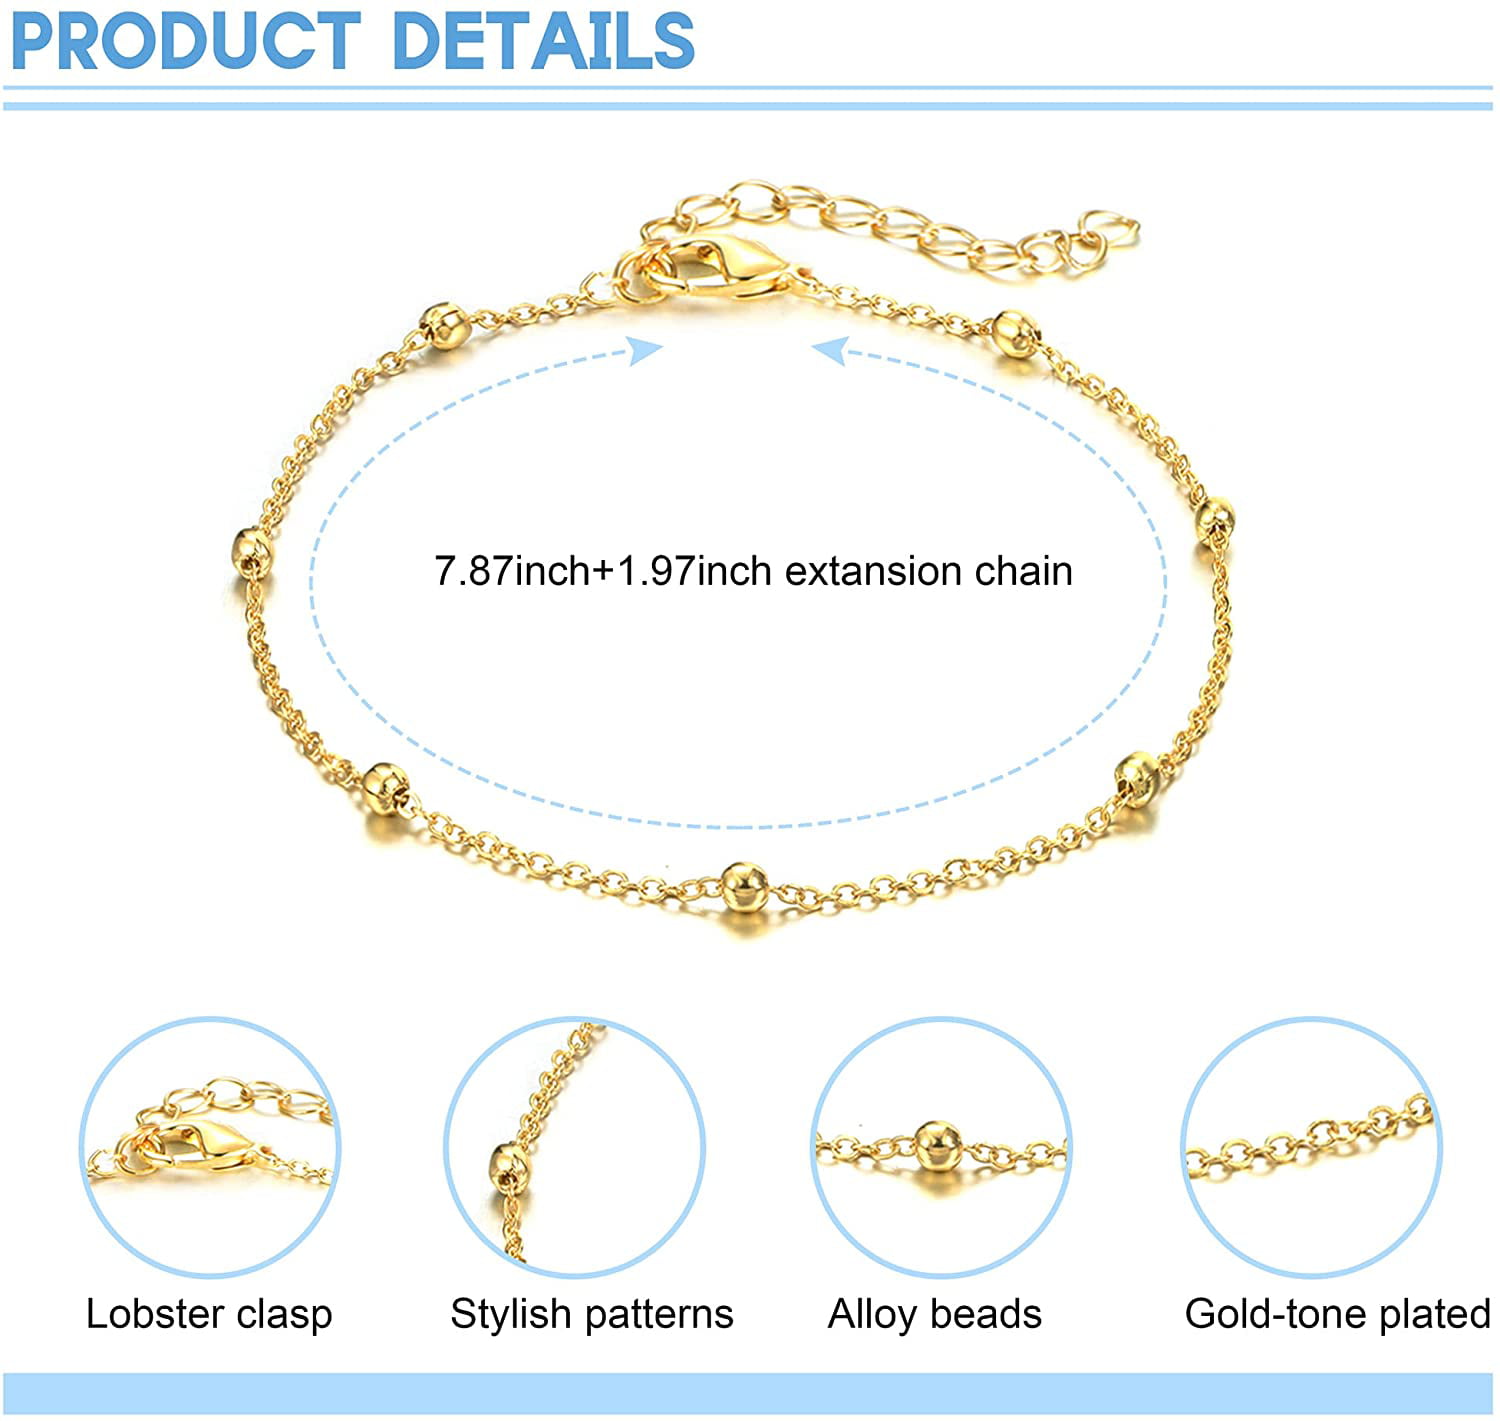 MILACOLATO 12Pcs Women's Ankle Bracelets Adjustable Silver Gold Plated Butterfly Star Layered Ankle Chain Dainty Rhinestone Cute Charm Bracelets Summer Beach Foot Jewelry